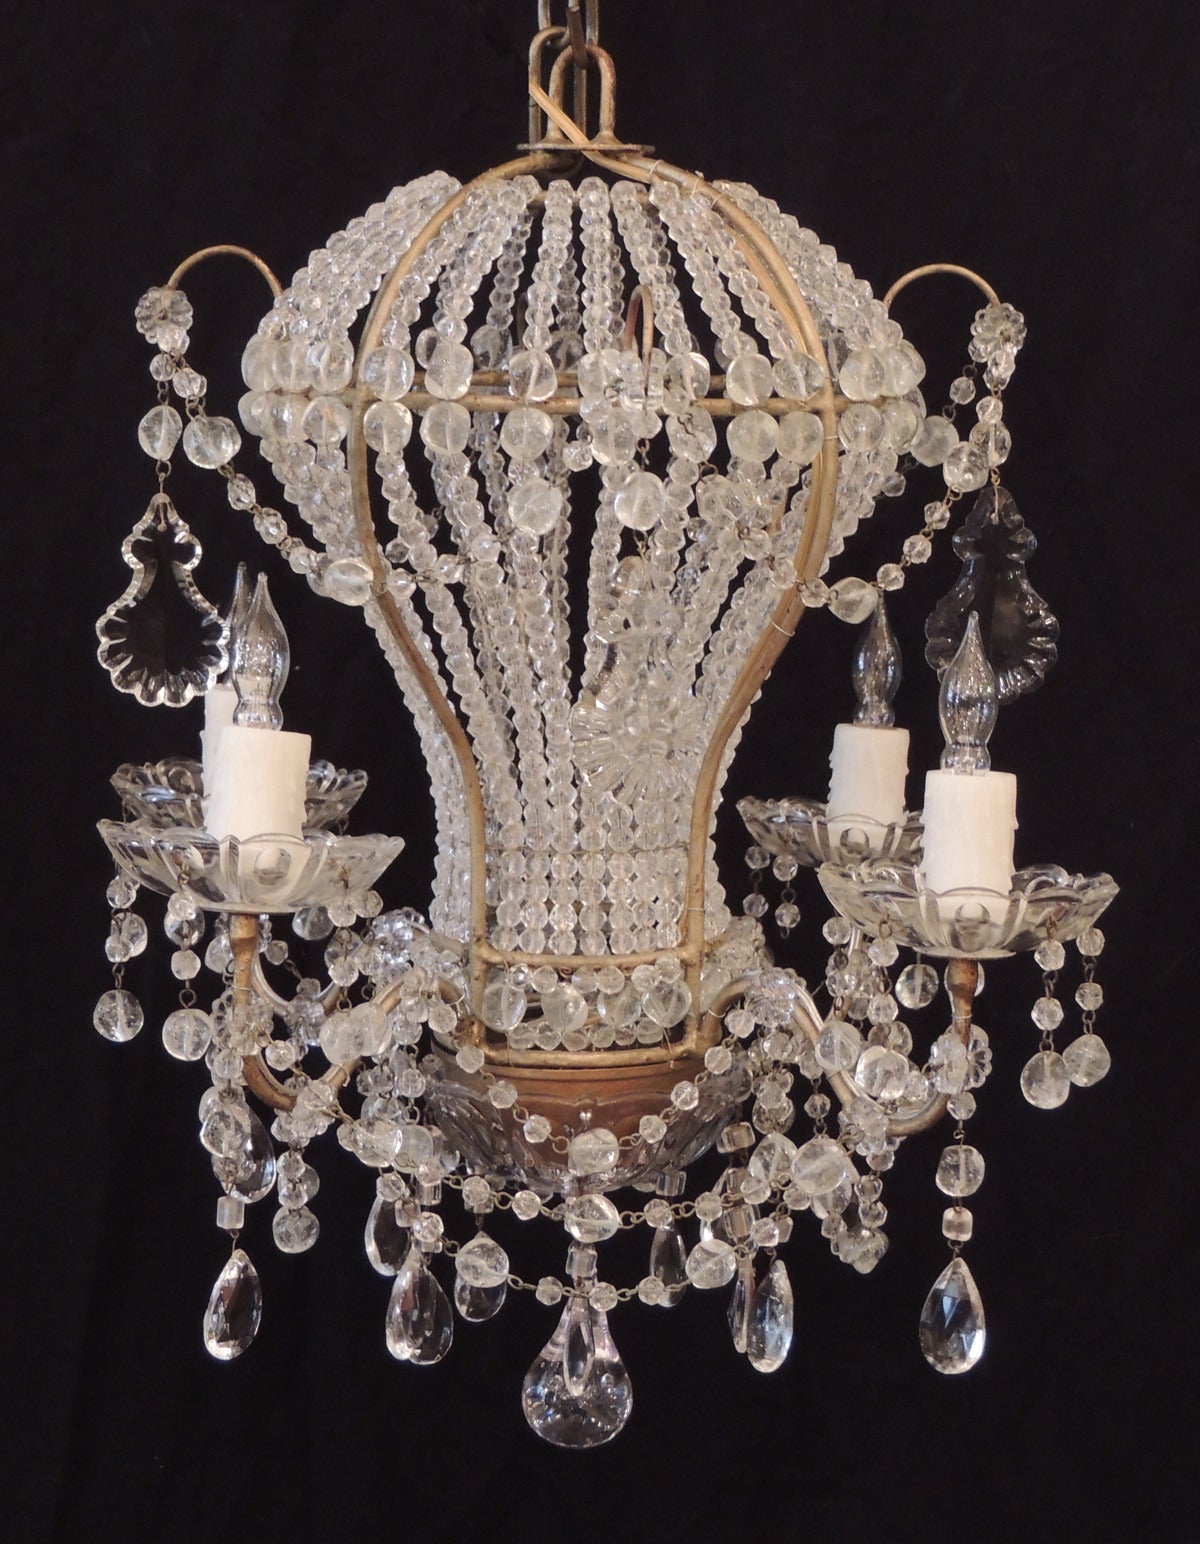 This chandelier was made in Italy during the first half of the 20th century, circa 1920, and is in the shape of a hot air balloon with four lights. The top section features crystal and rock swag hanging outside the top of the balloon with four